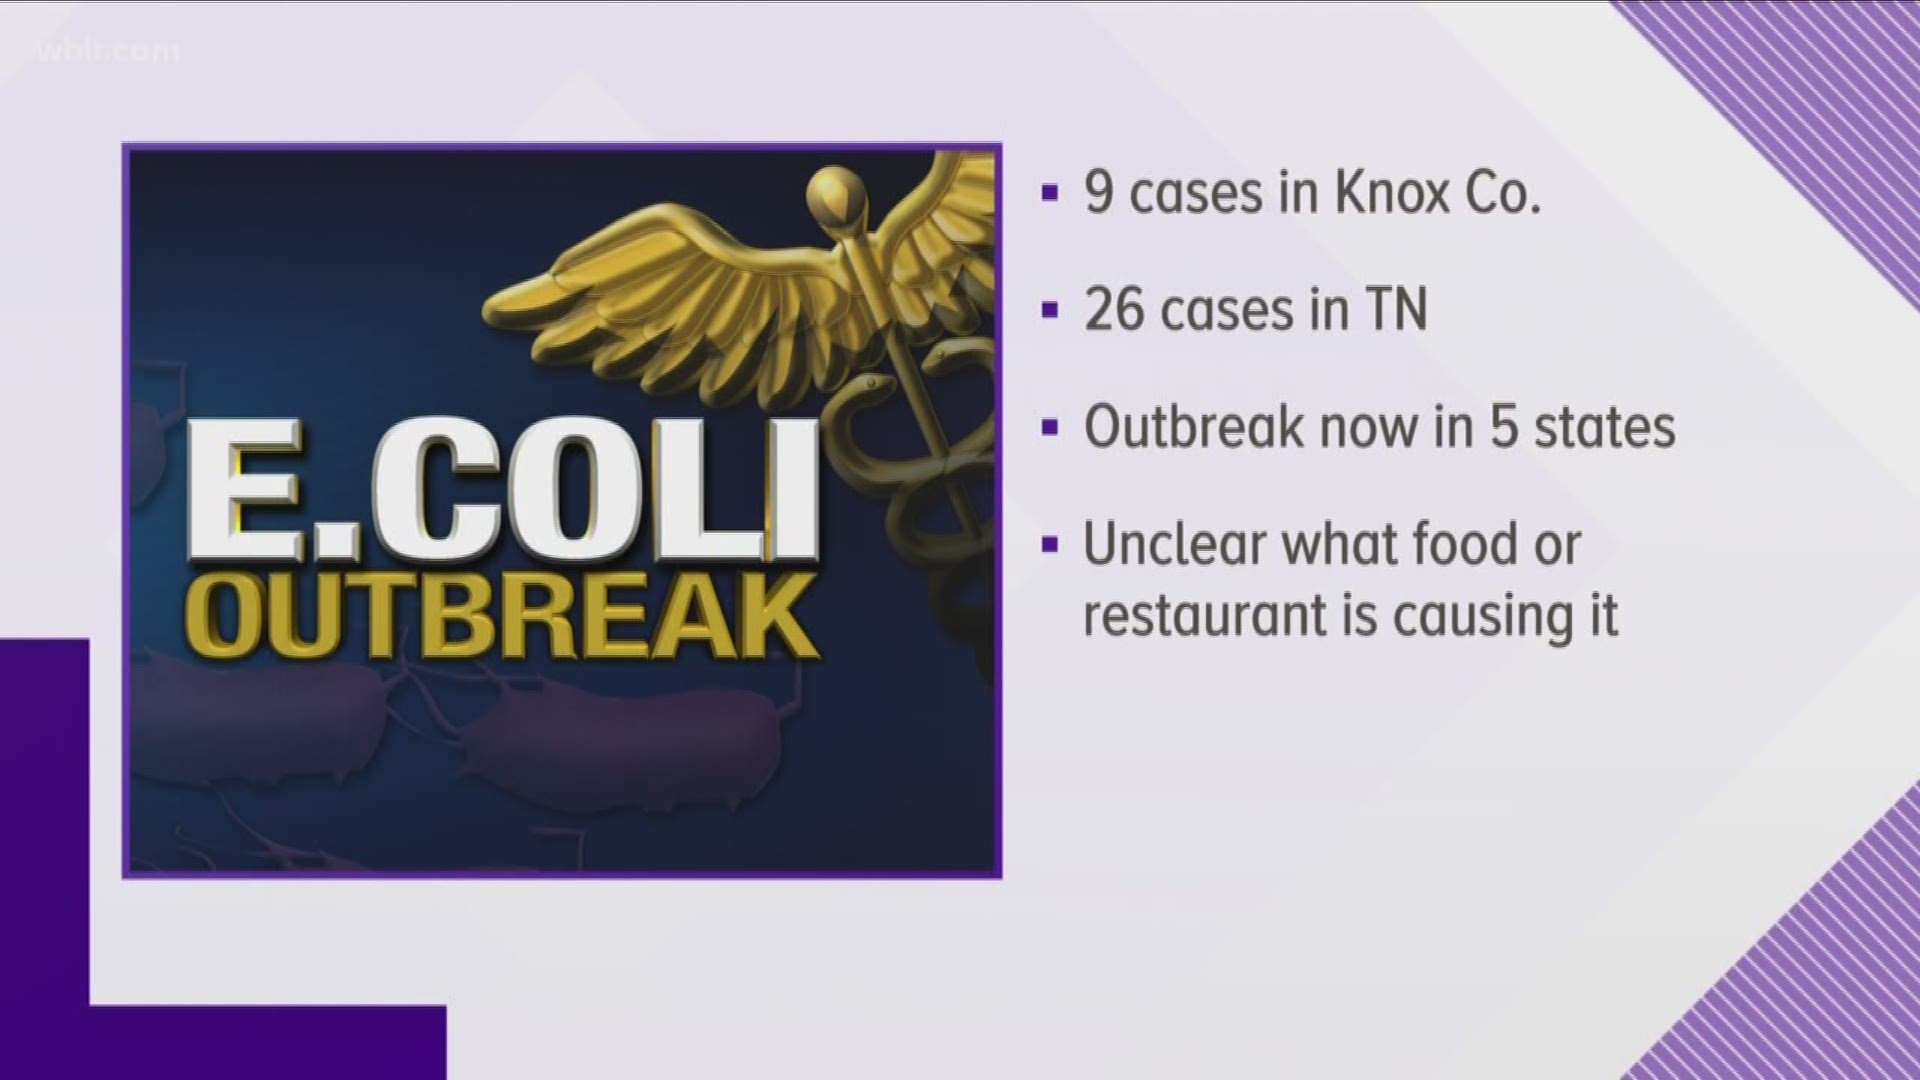 There were a total of 26 cases in Tennessee as of April 9 that were part of the outbreak, the CDC said on its website.